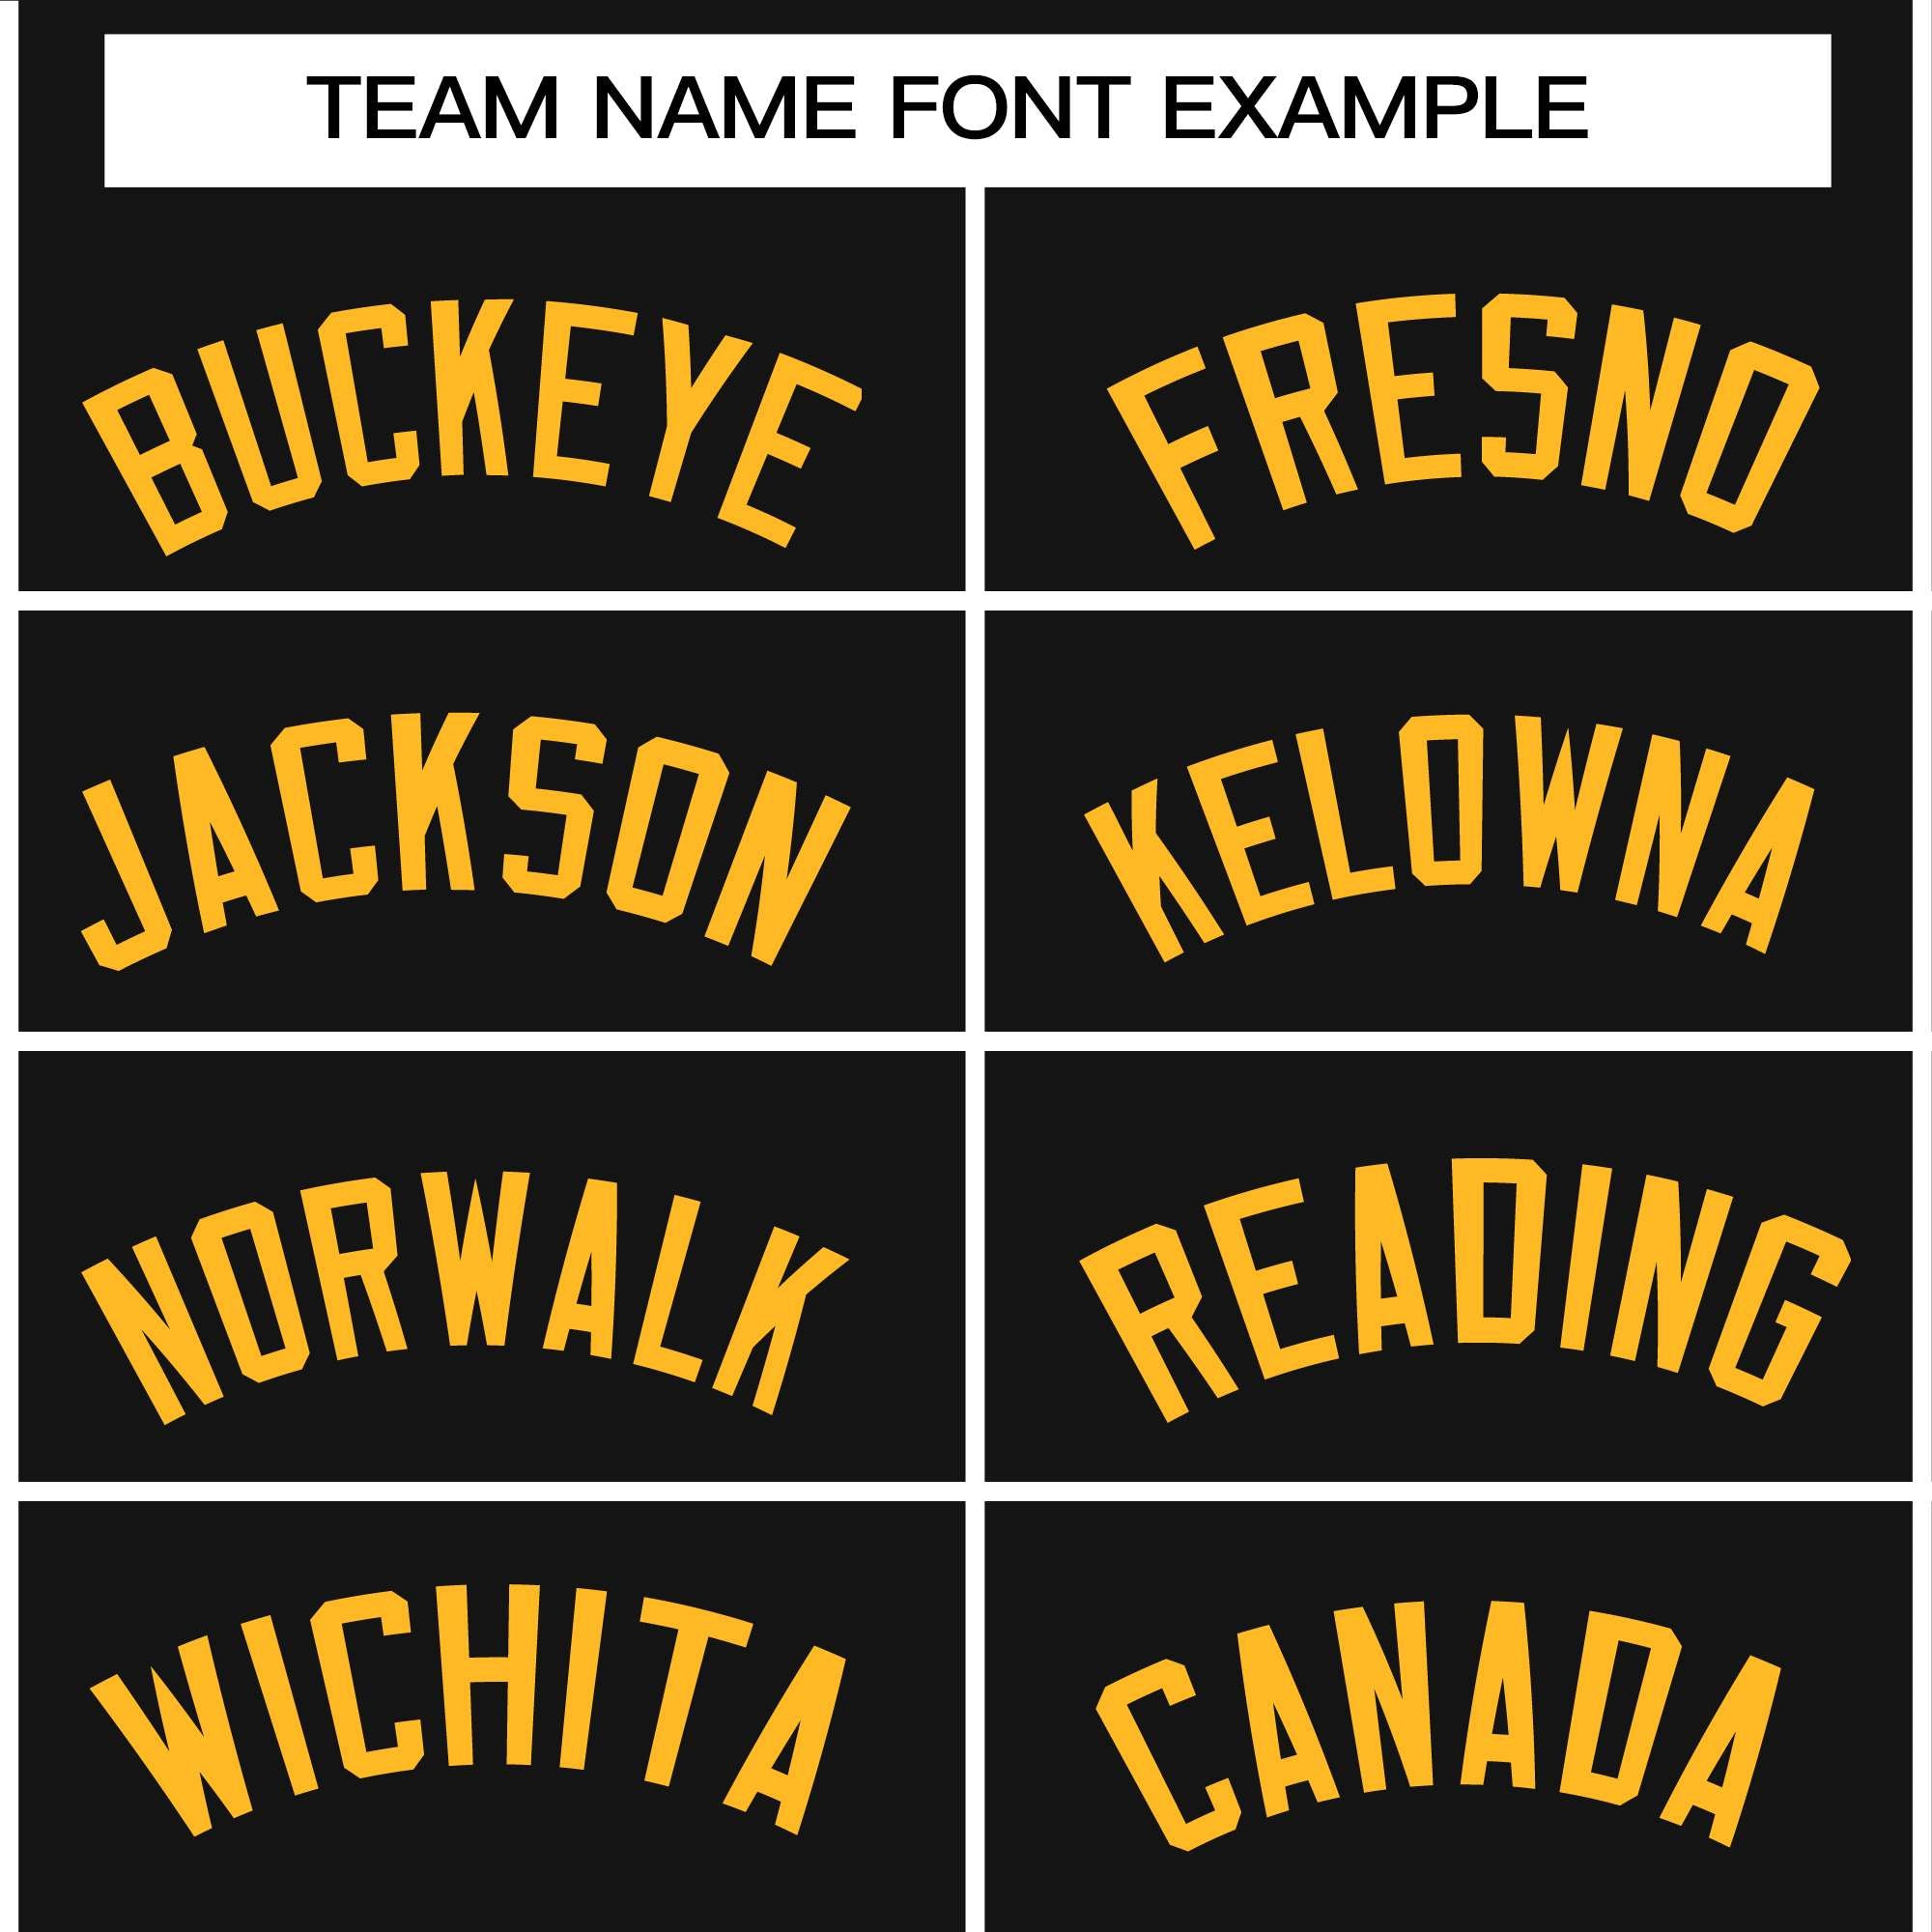 personalized couple oversized hoodies team name example